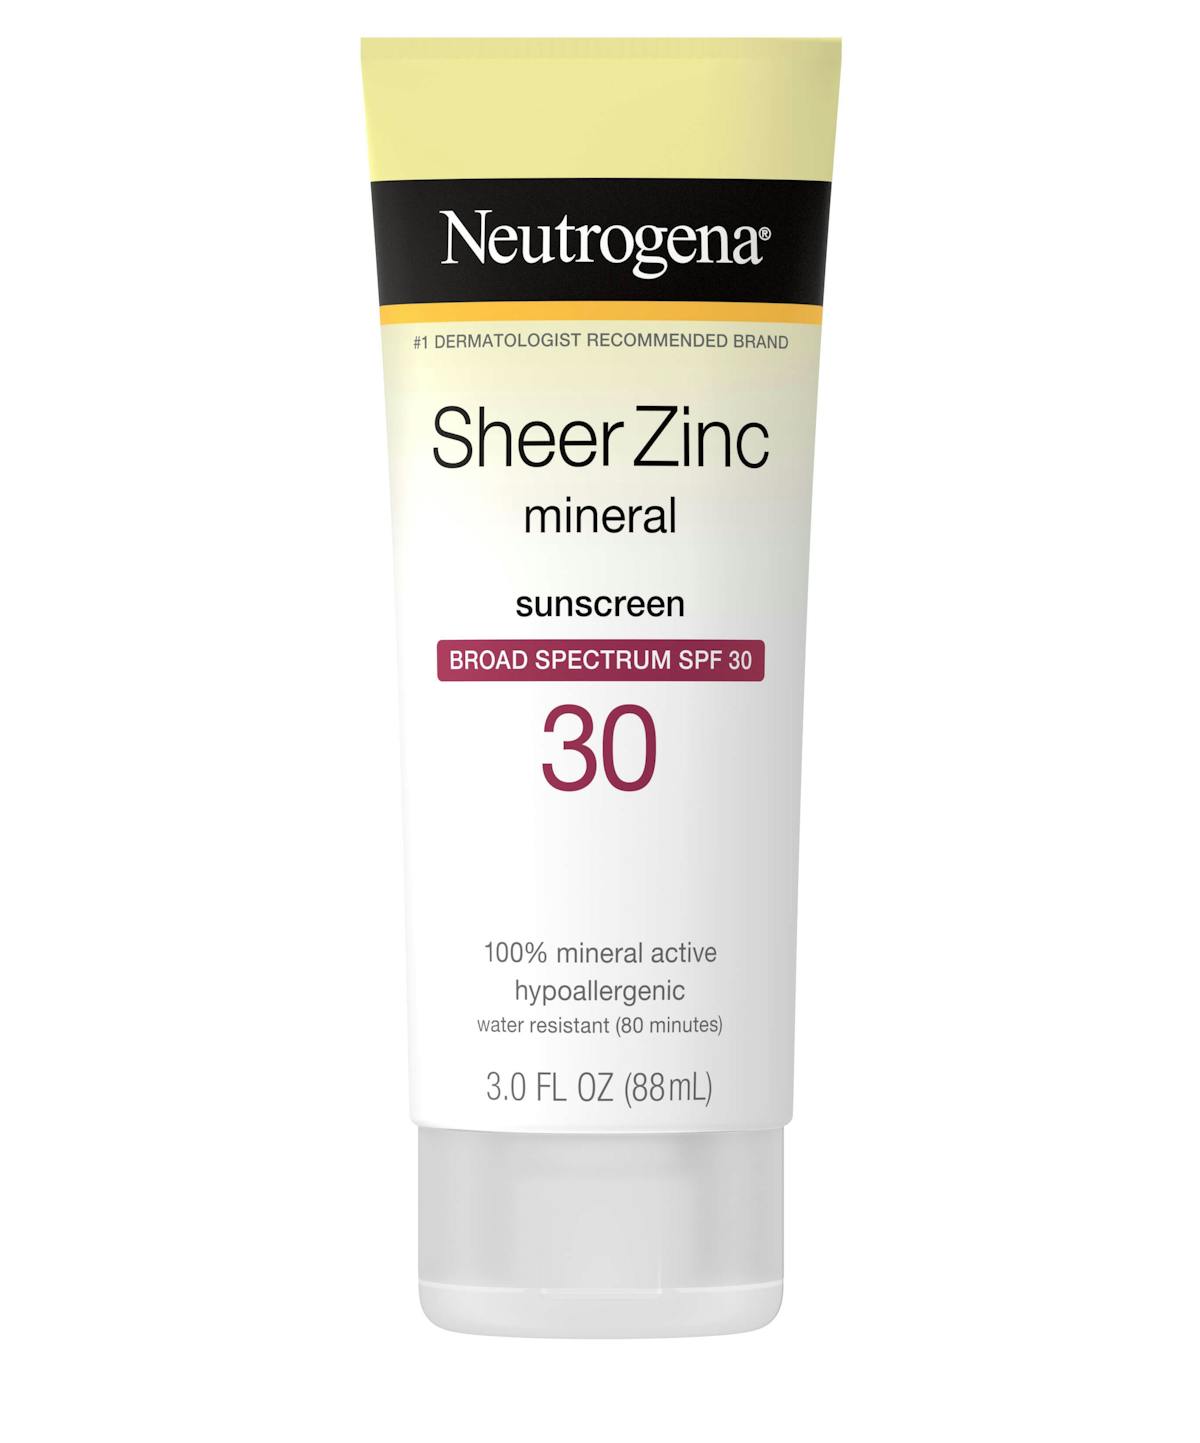 Neutrogena Ultra Sheer Dry-Touch Water Resistant and Non-Greasy Sunscreen  Lotion with Broad Spectrum SPF